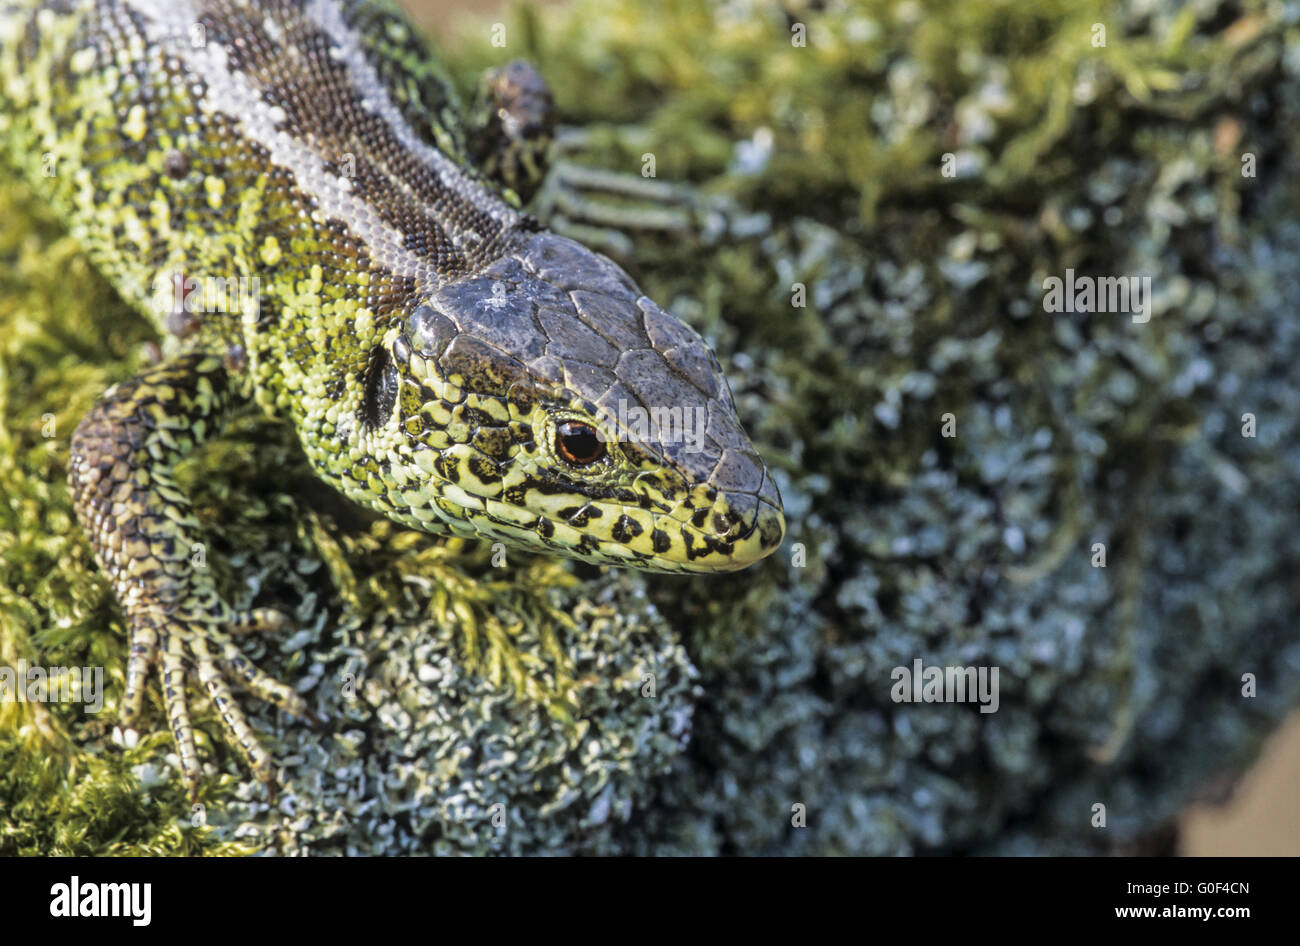 Sand Lizard the female lays eggs in loose sands in a sunny location Stock Photo